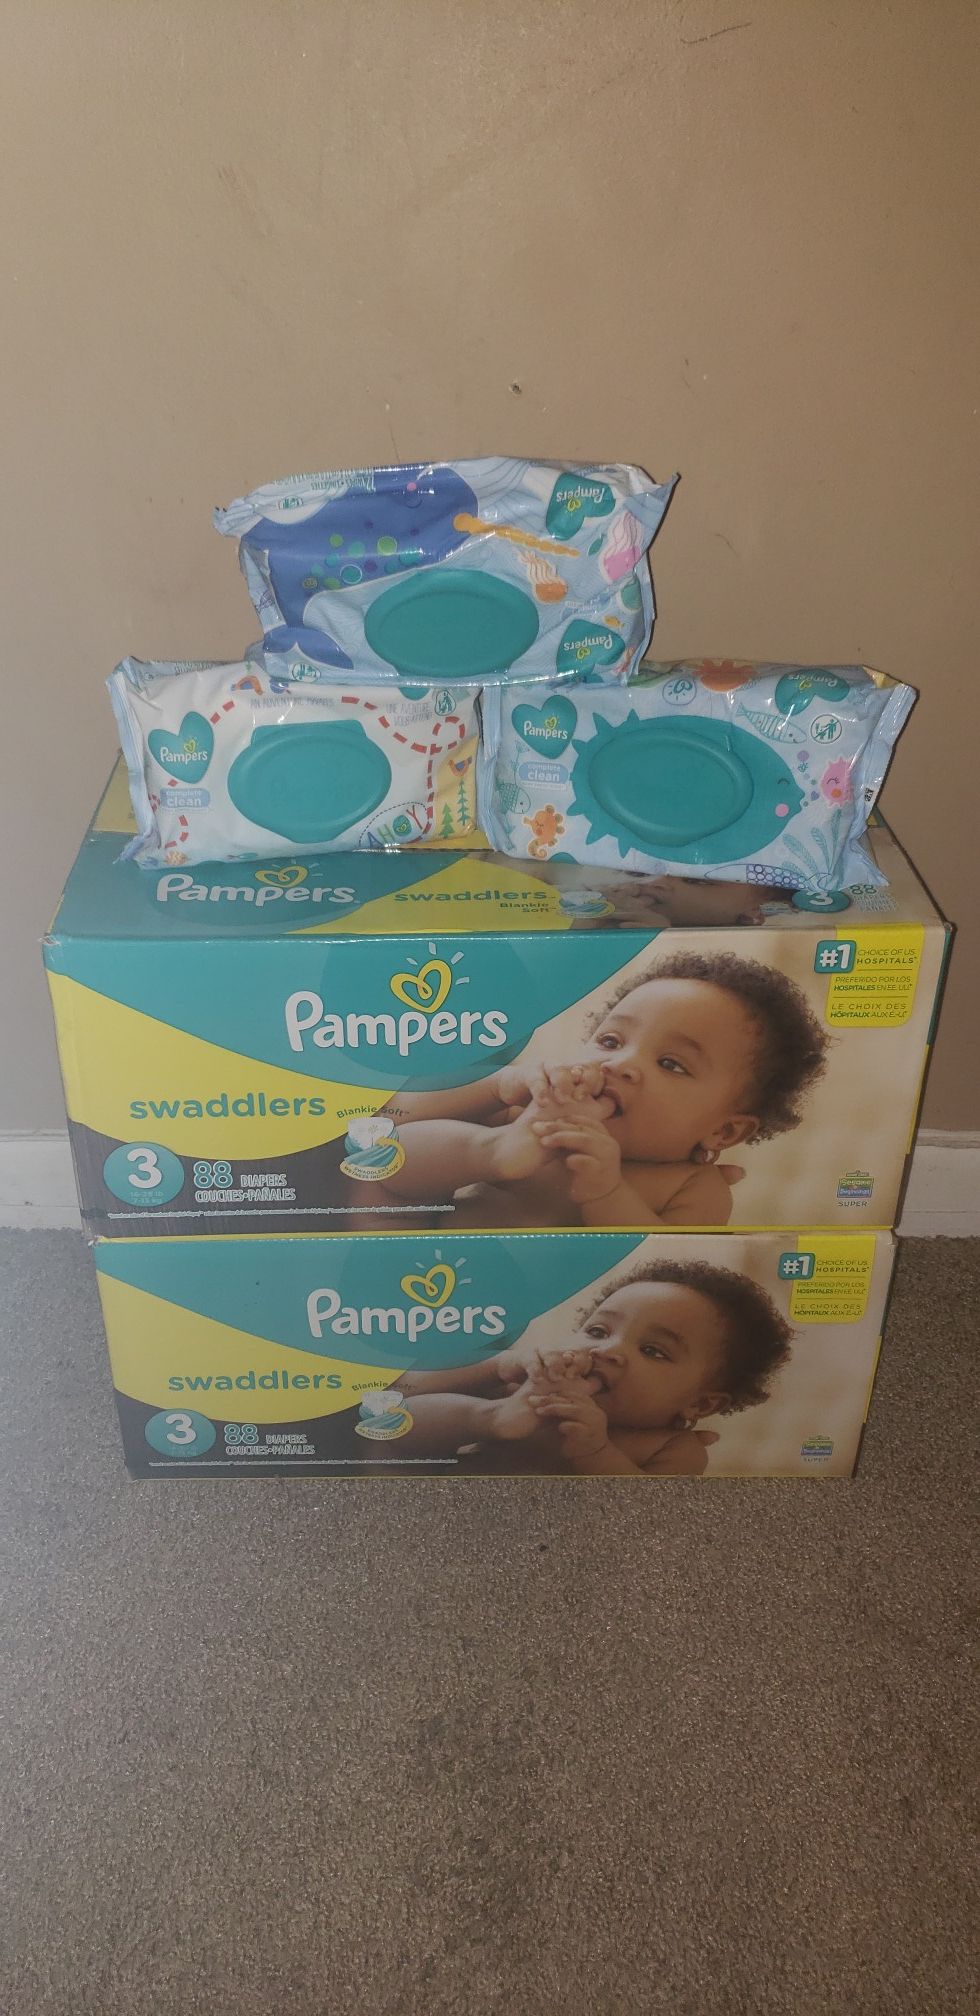 $45.00 (2/88 Pampers Swaddlers3/73)2 Pampers wipes)